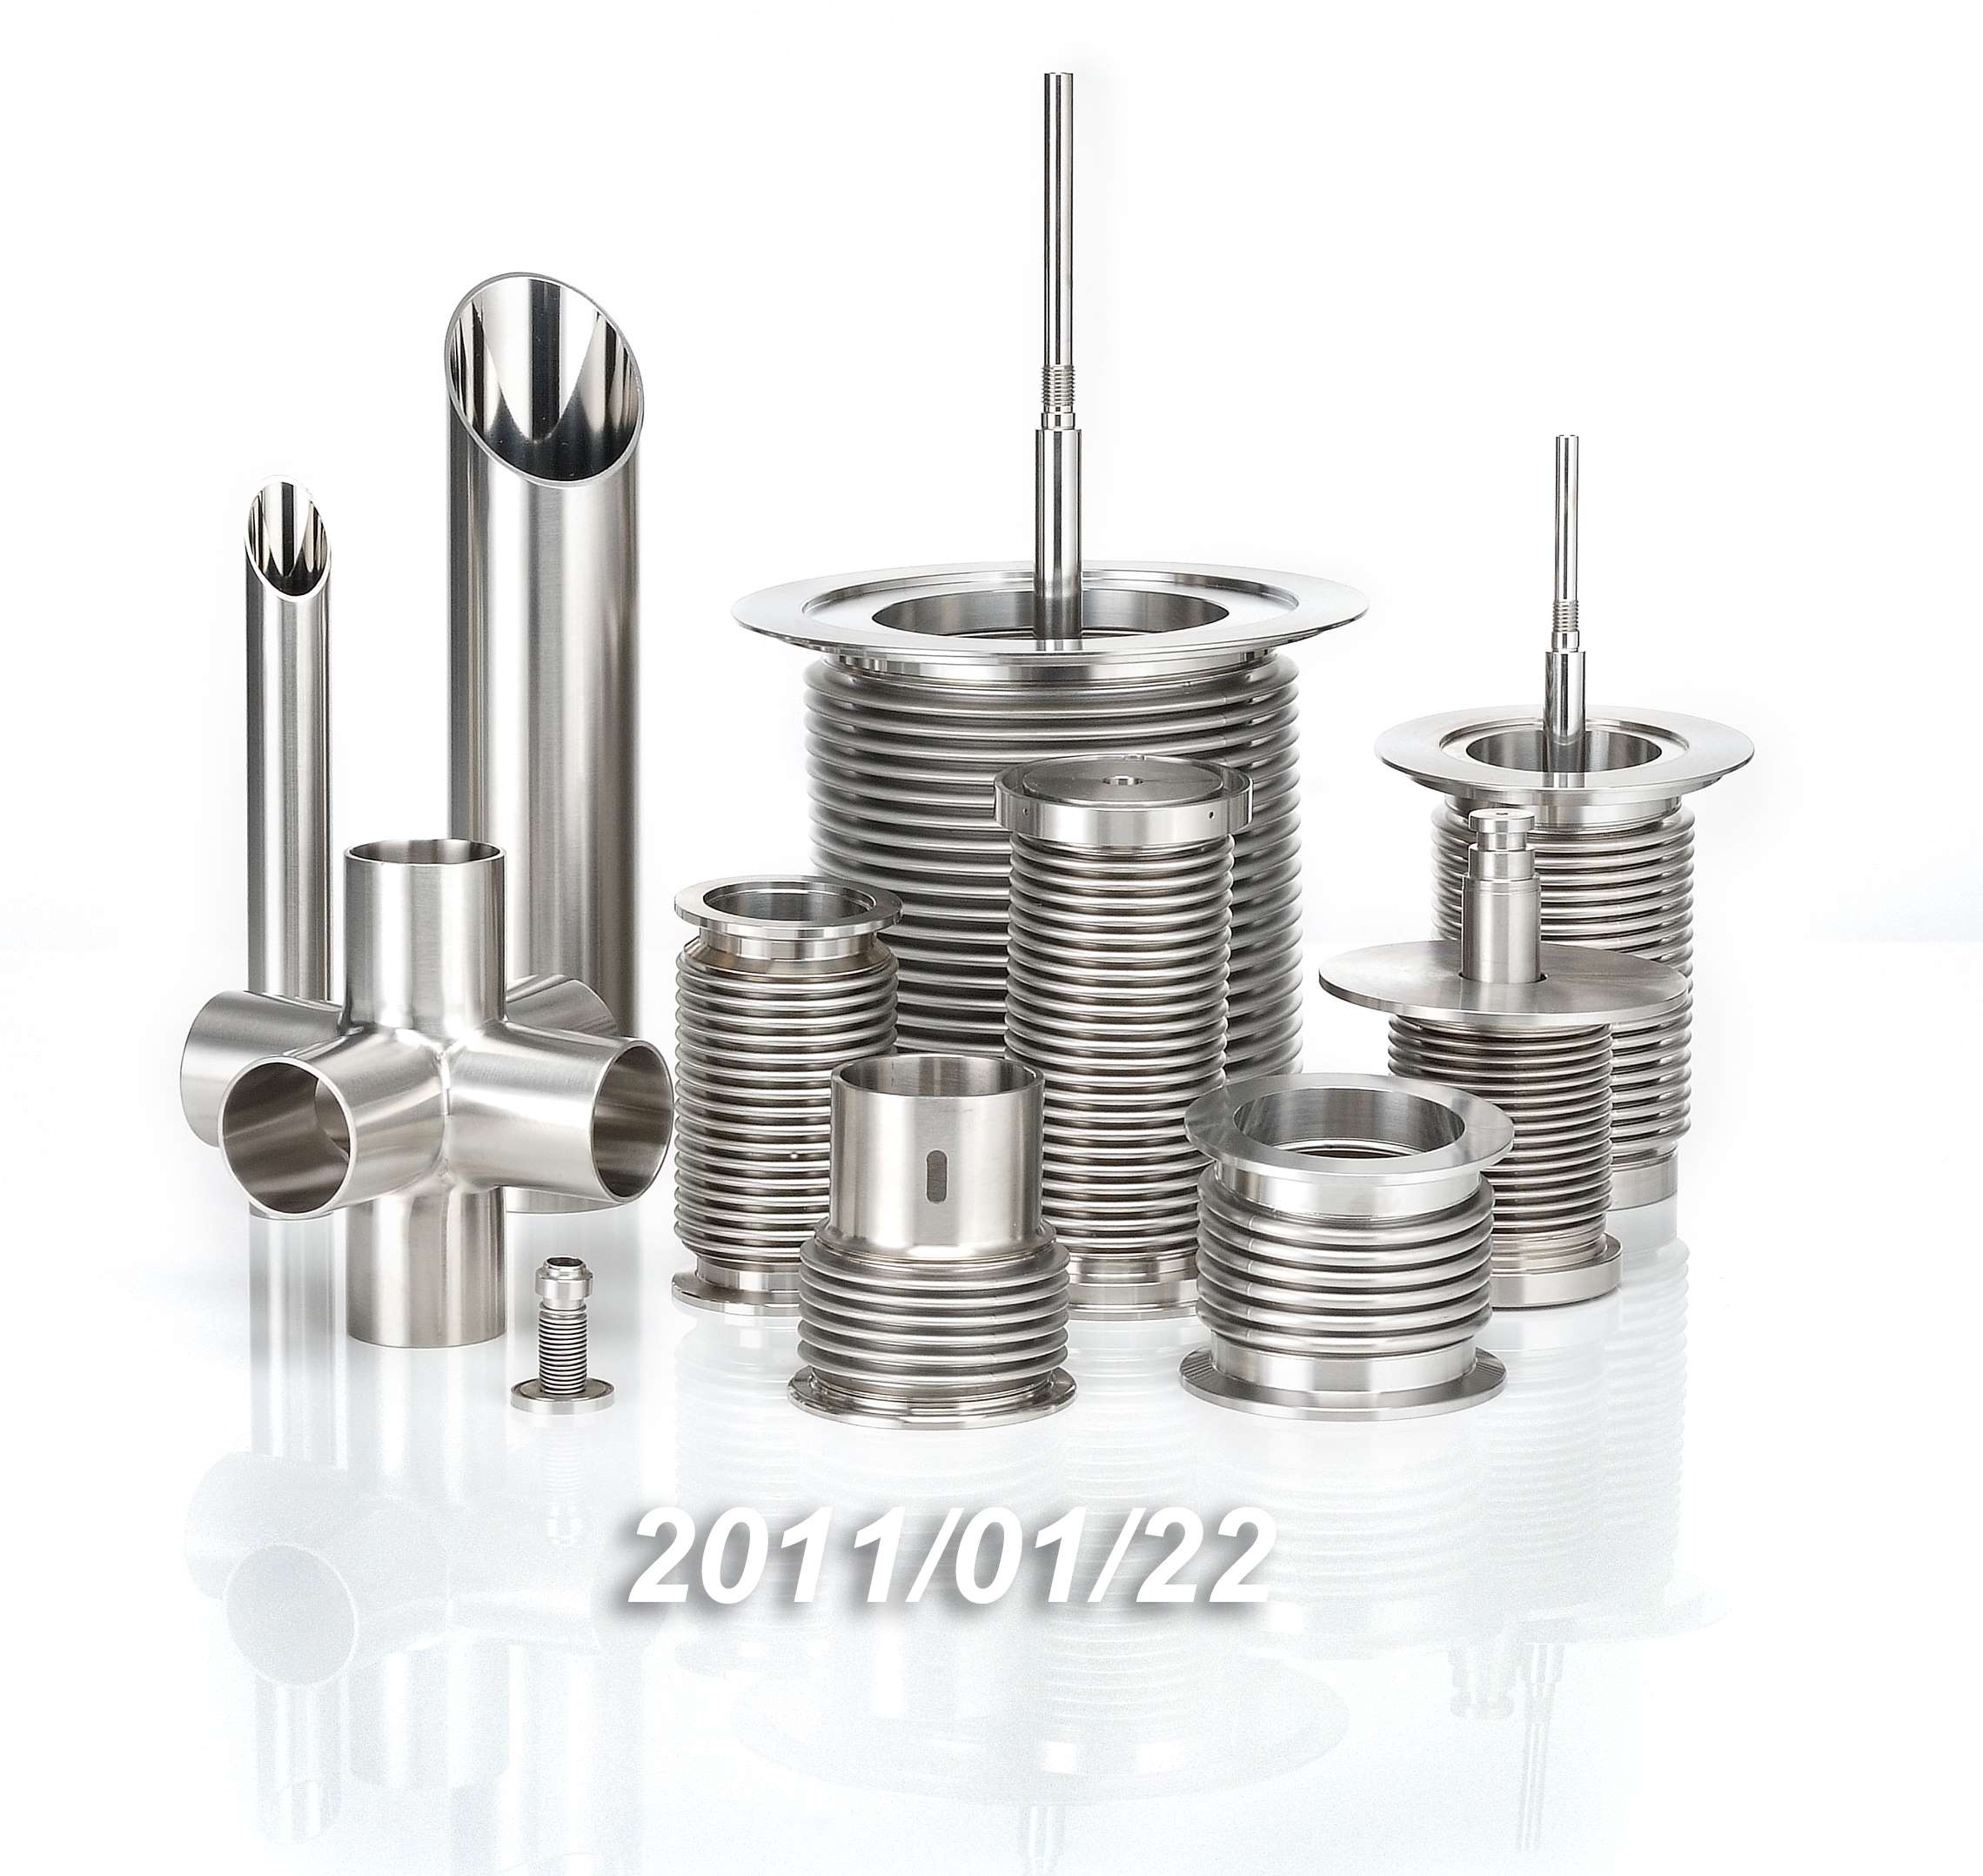 Qualified High Pressure Manufacturer and Supplier